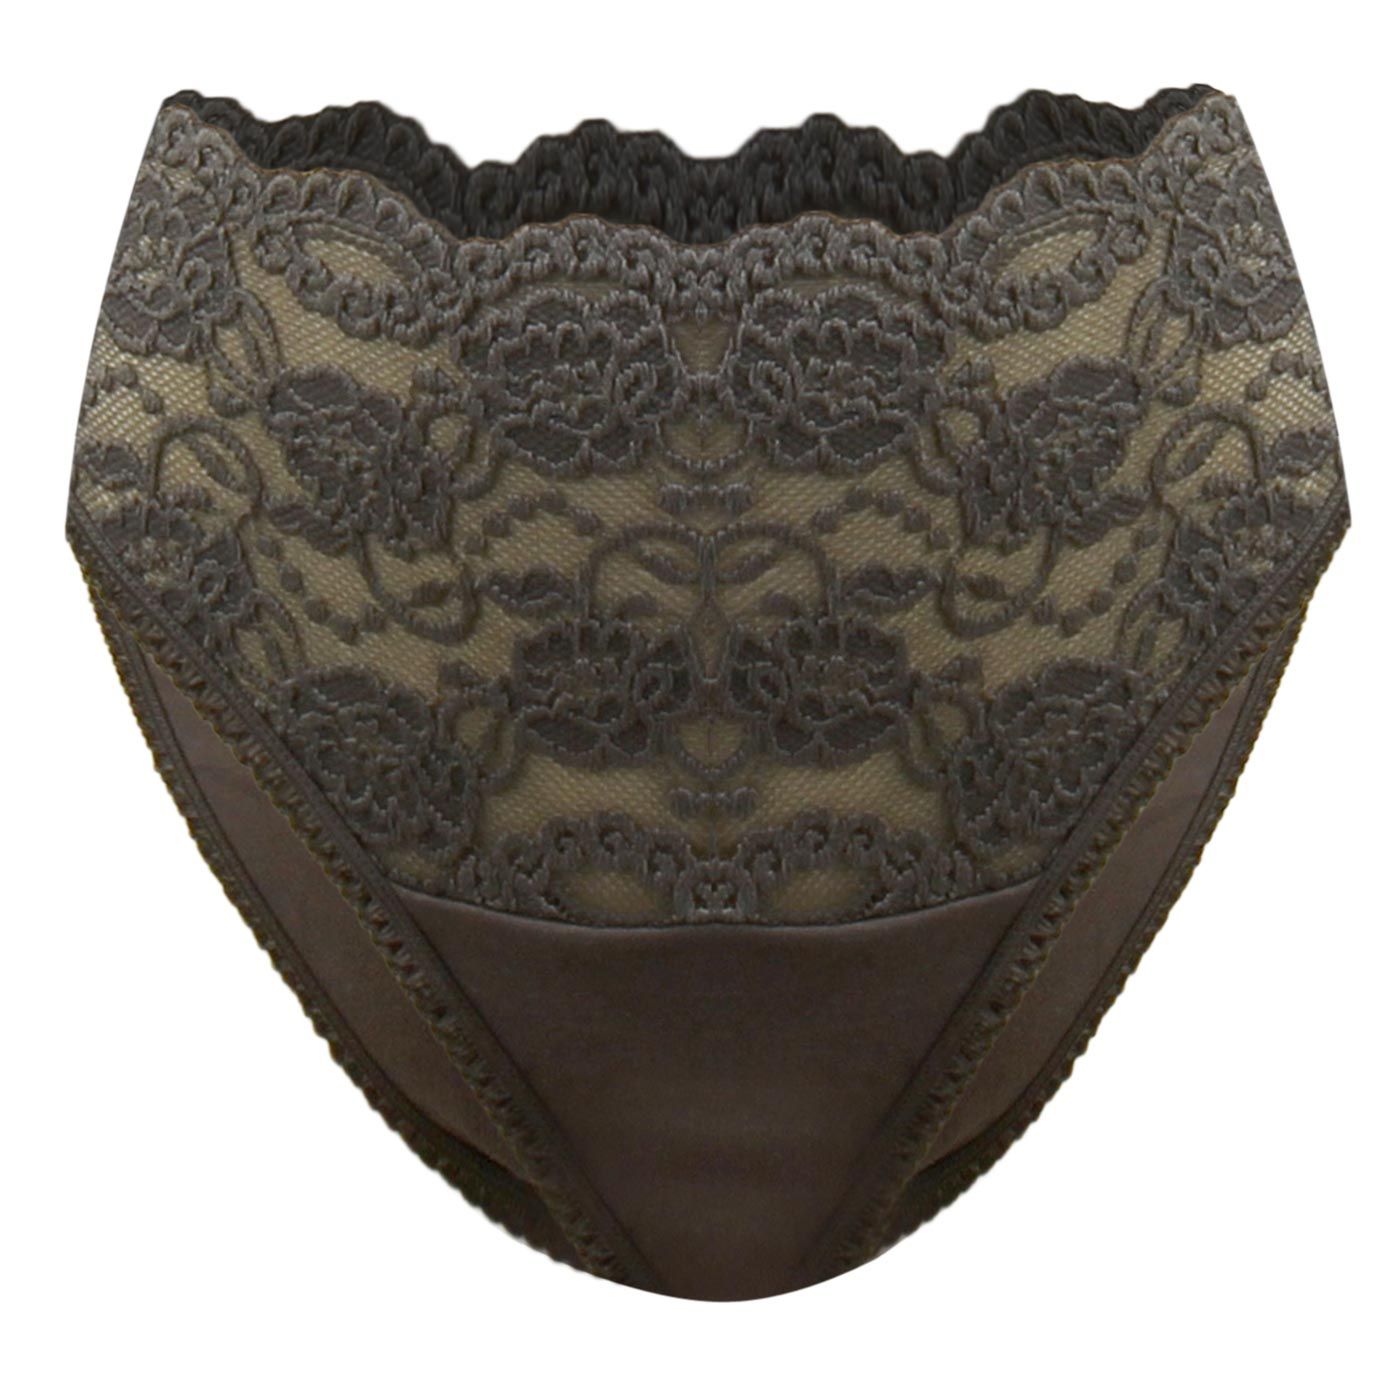 Carriwell Lace Stretch Panties-M-Olive - 1